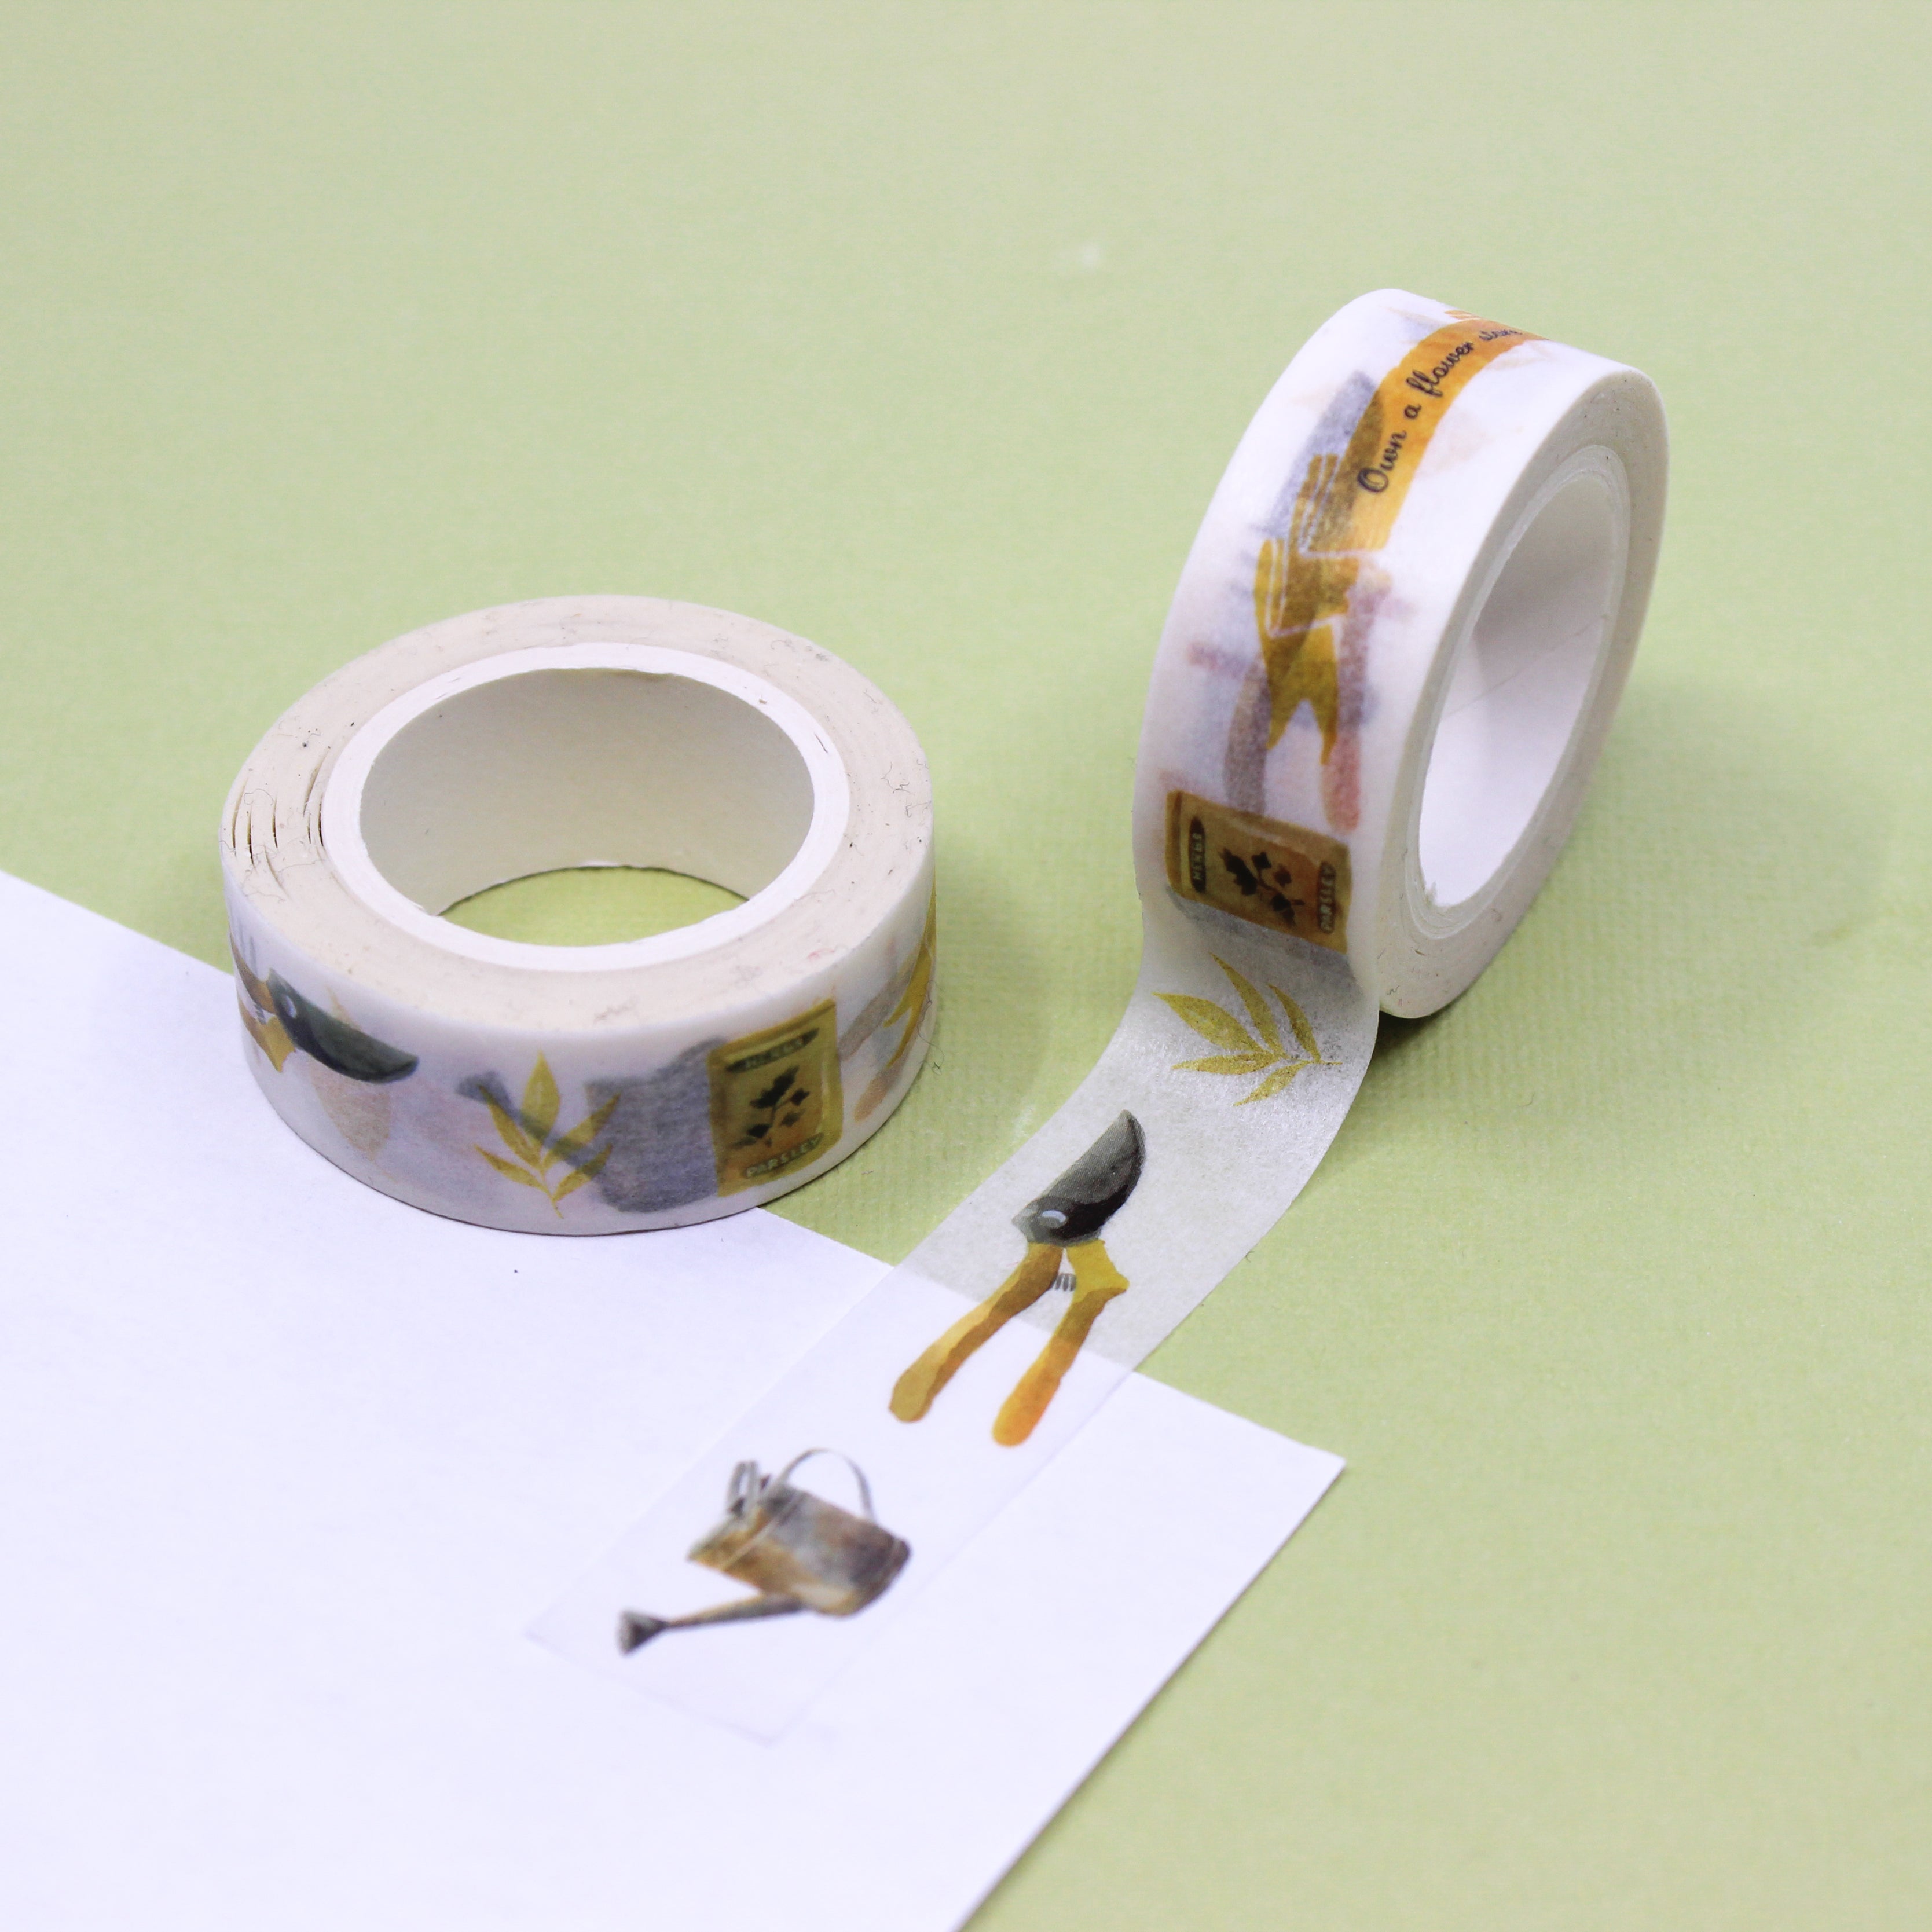 This pretty yellow garden tools tape is a refreshing, colorful pattern perfect for your BUJO and craft projects. This is the perfect gift for a gardening hobbyist to schedule their gardening days in their Calendar or seal up seed packets. This adorable tape is sold at BBB Supplies Craft Shop.